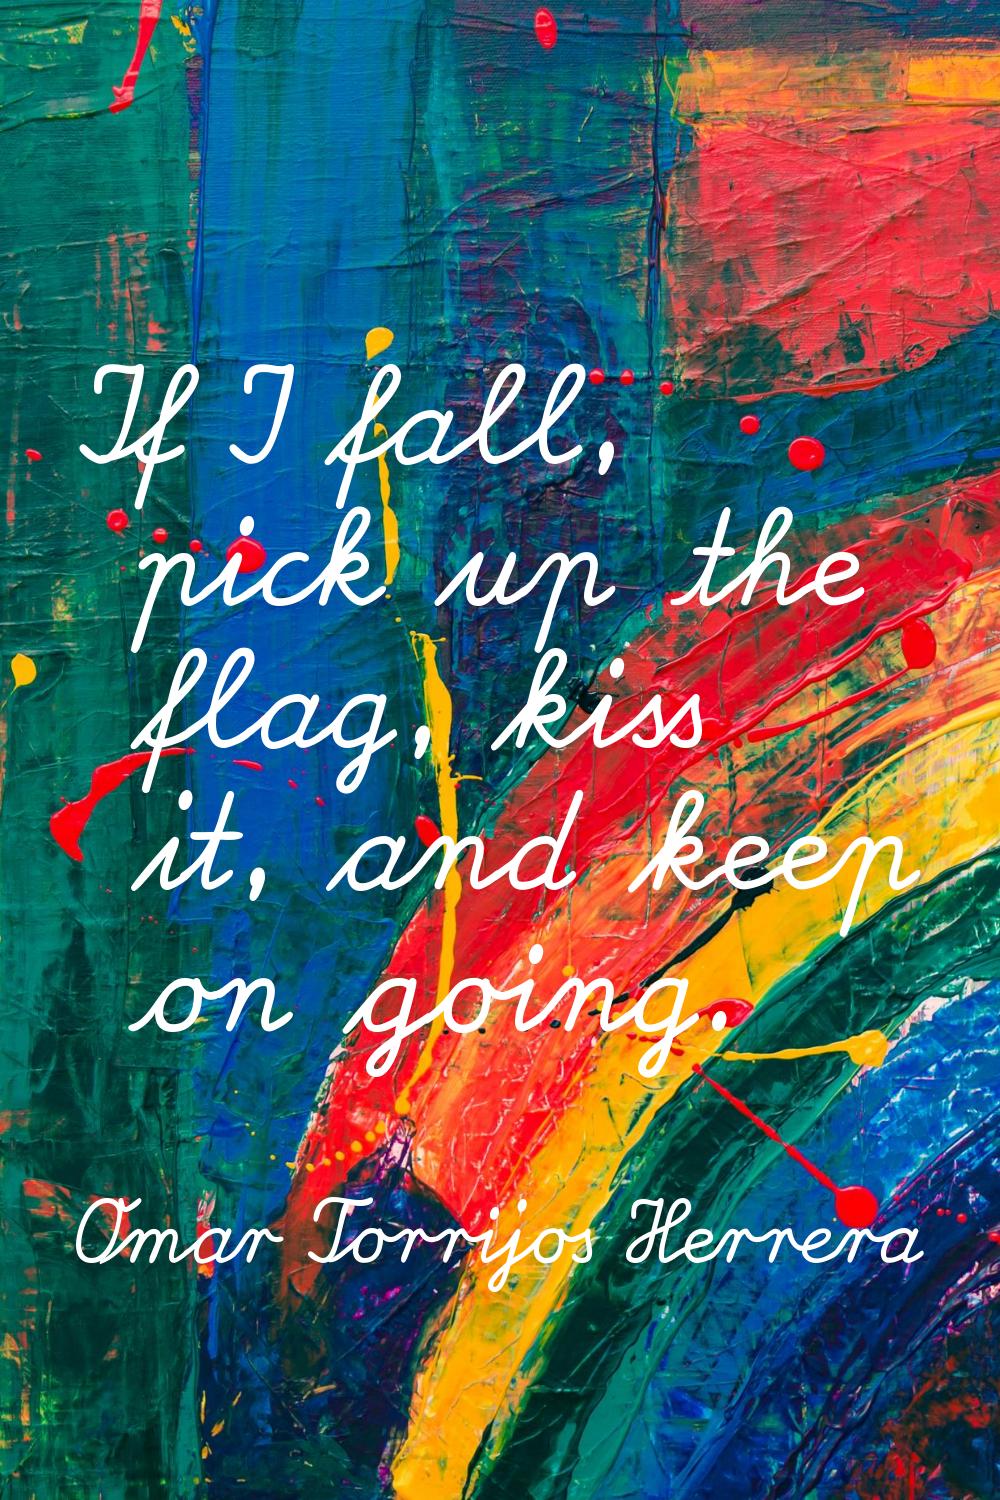 If I fall, pick up the flag, kiss it, and keep on going.